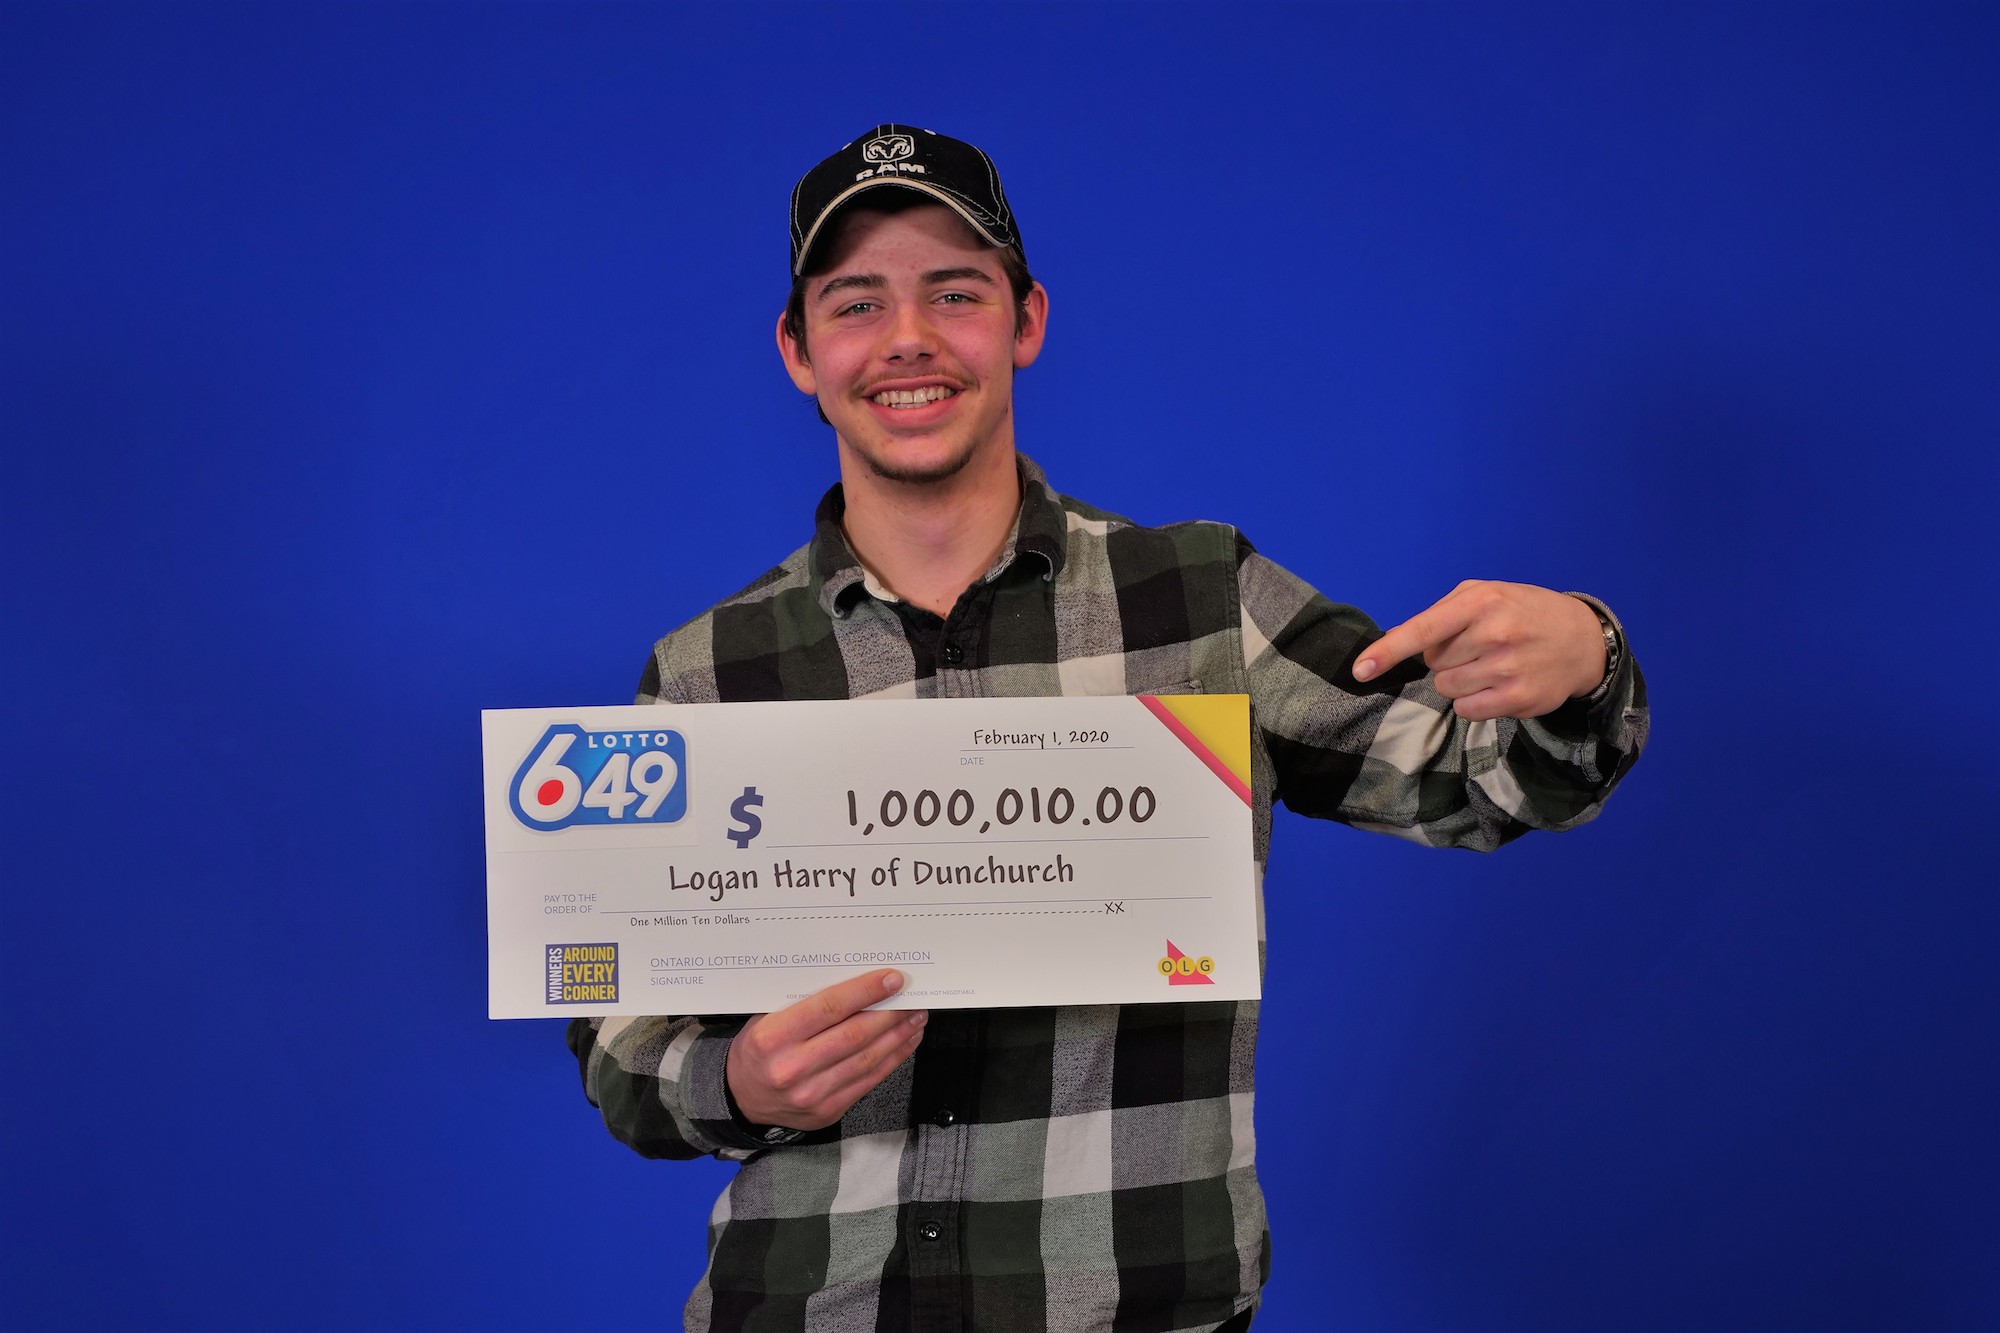 lotto 649 time of draw